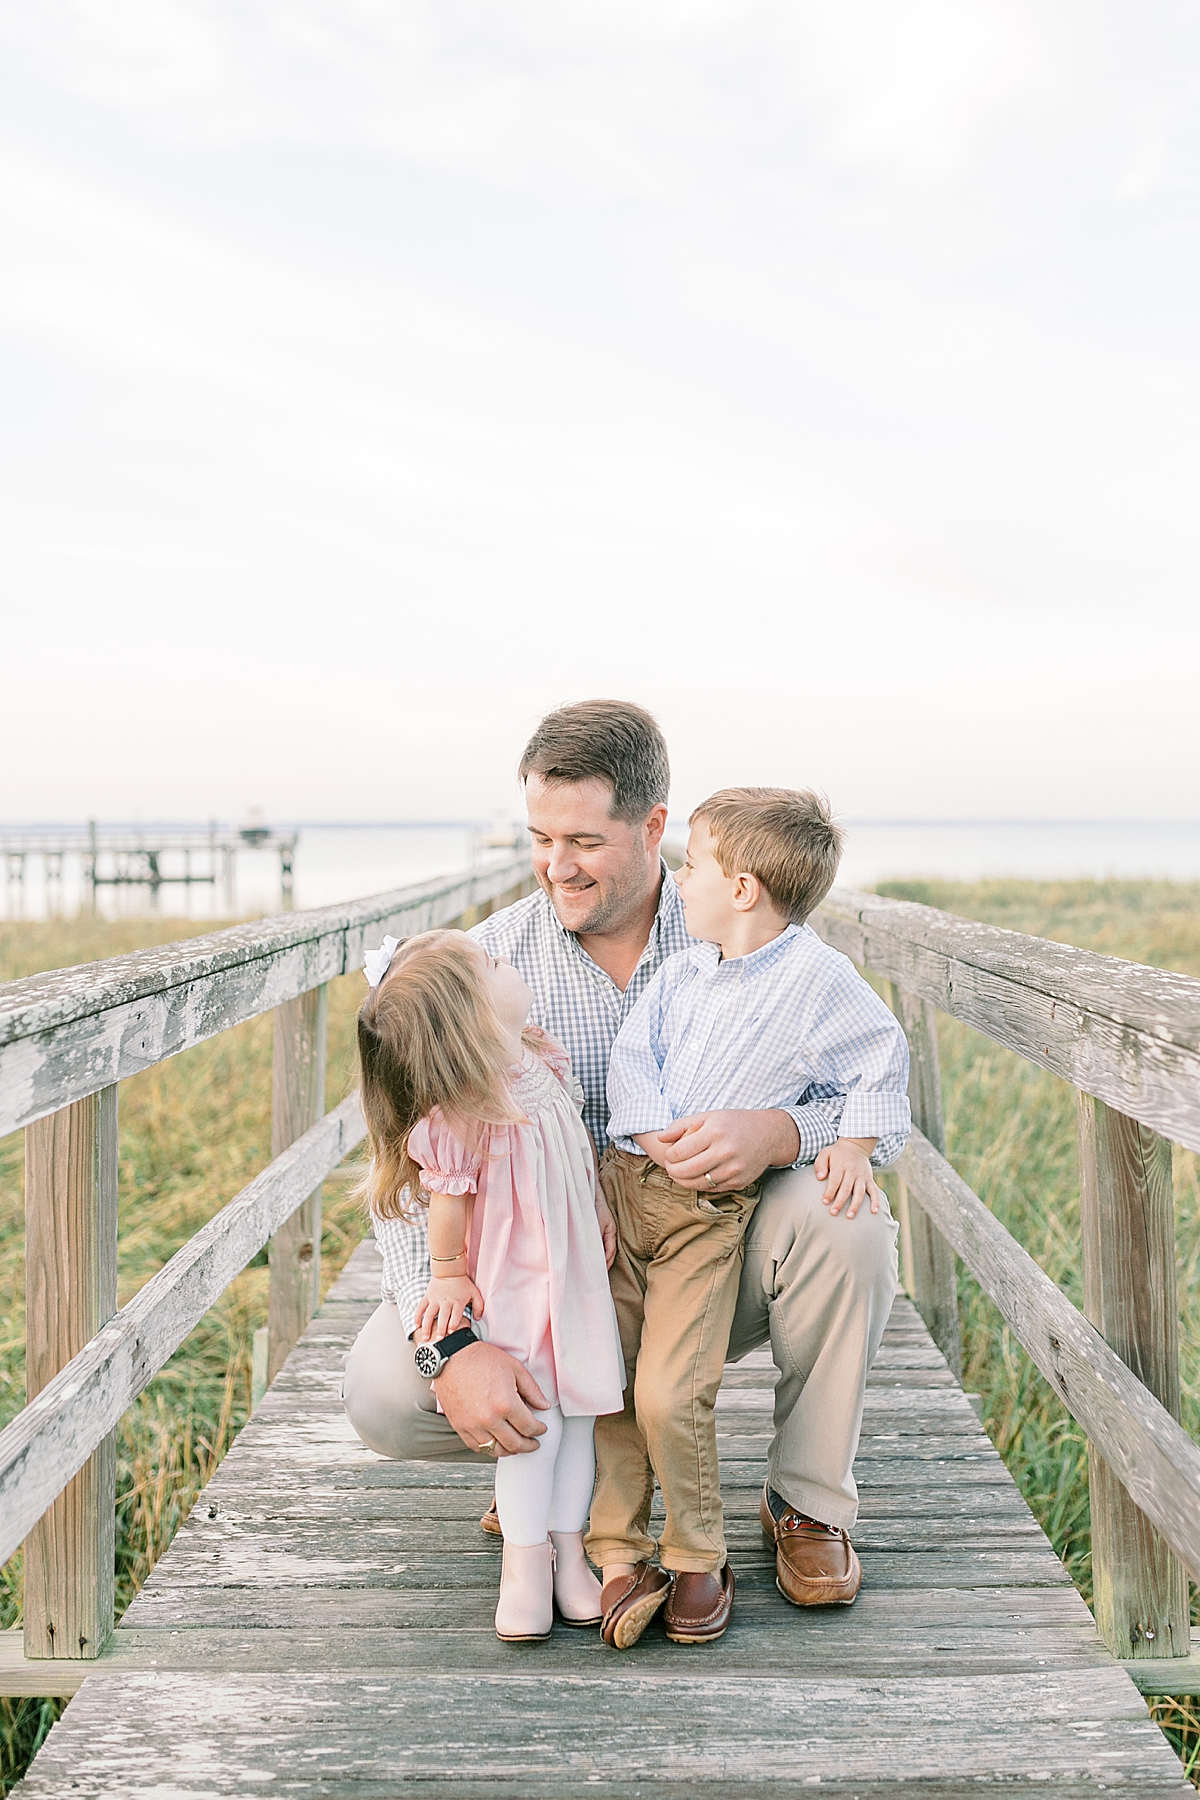 Dad with kids on the dock during family photoshoot. Photos by Mount Pleasant Family Photographer, Caitlyn Motycka Photography.